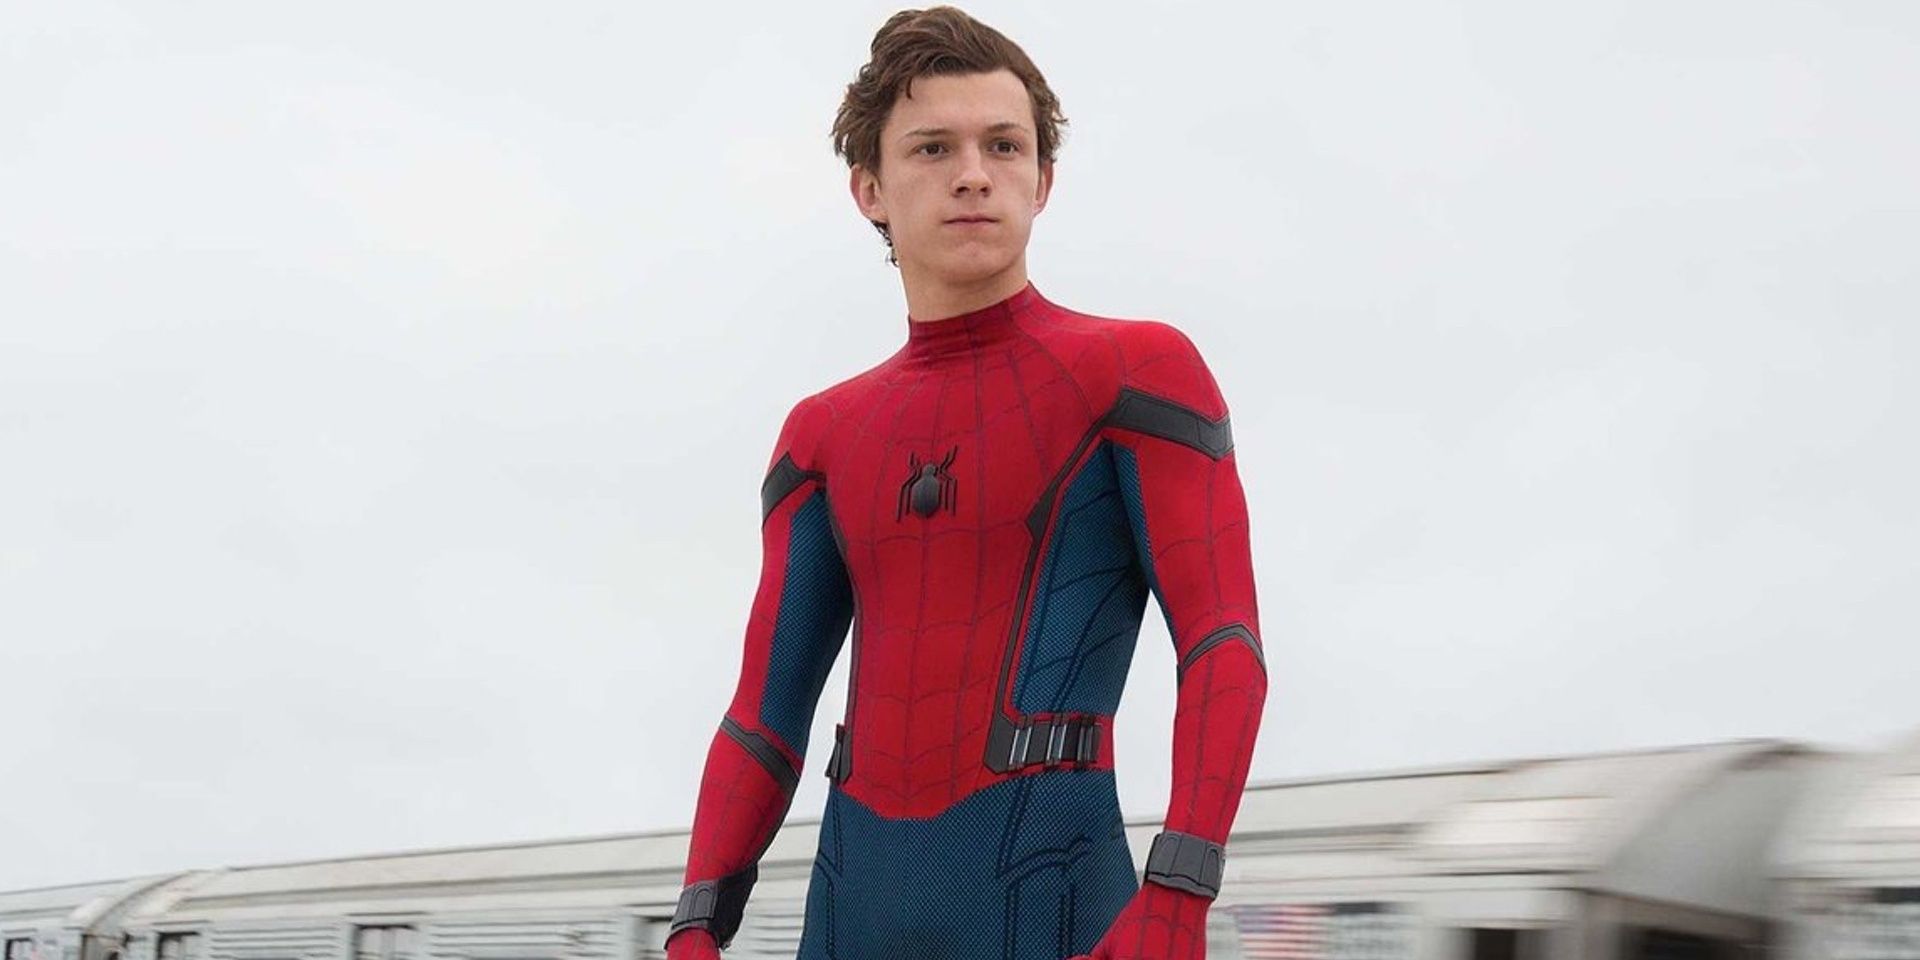 WATCH: Tom Holland Recruits Young Heart Transplant Patient Into the Spider-Verse